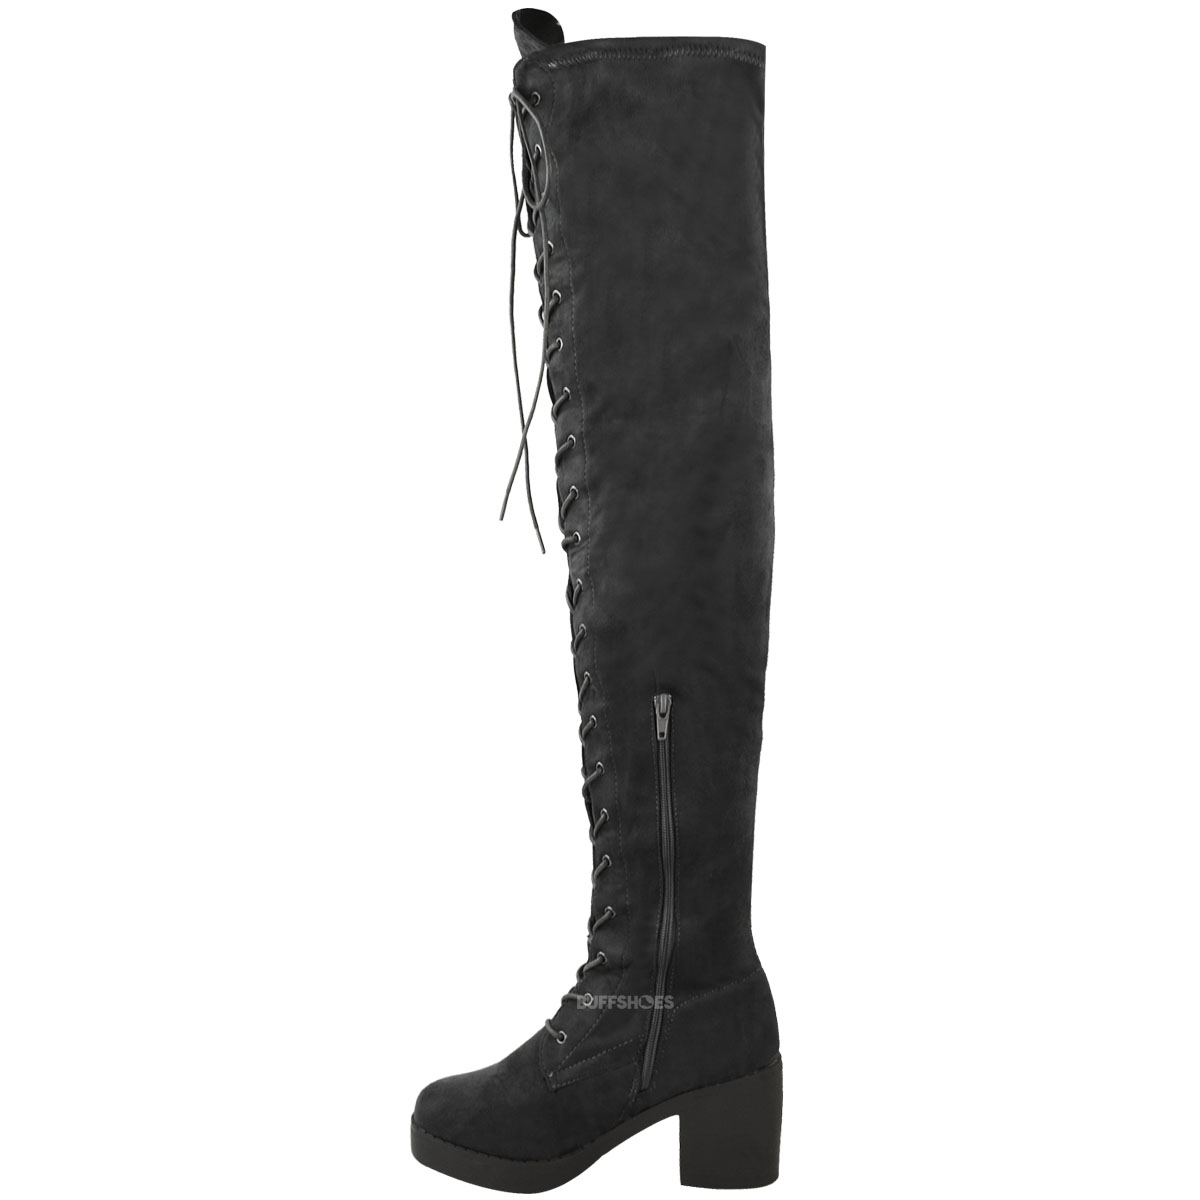 Womens Ladies Over The Knee Boots Lace Up Block Heel Thigh High Goth